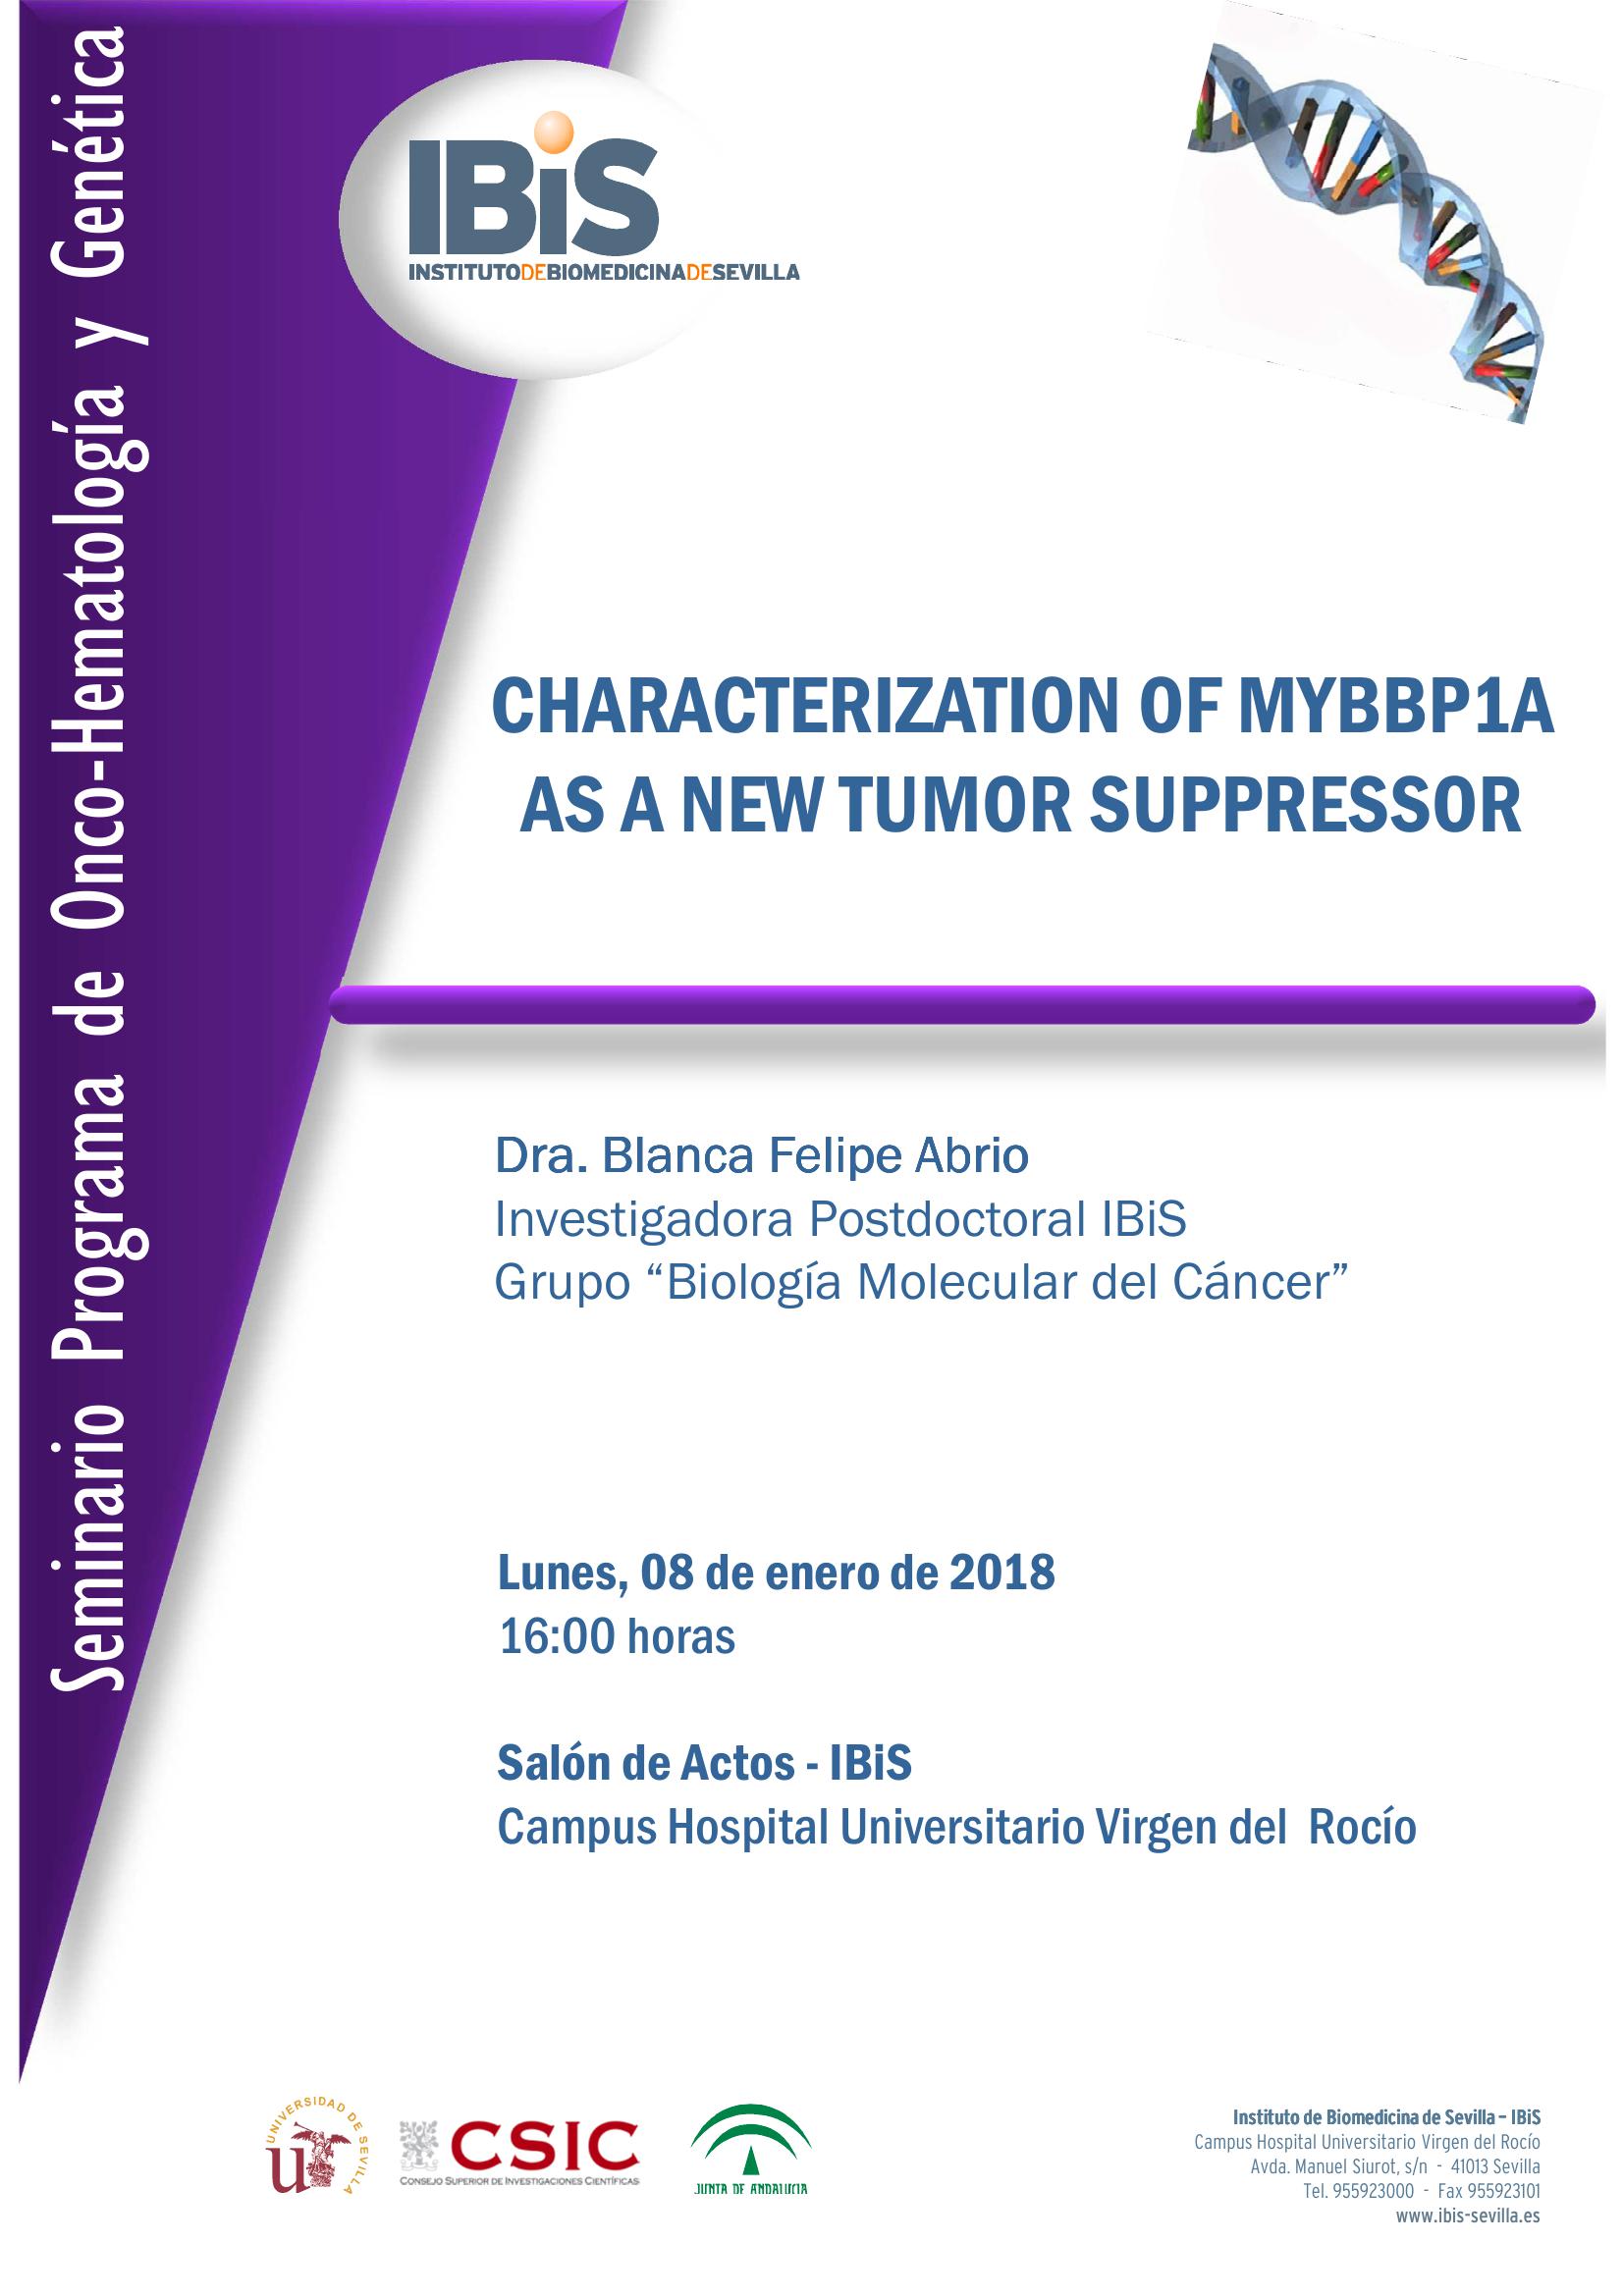 Poster: CHARACTERIZATION OF MYBBP1A AS A NEW TUMOR SUPPRESSOR